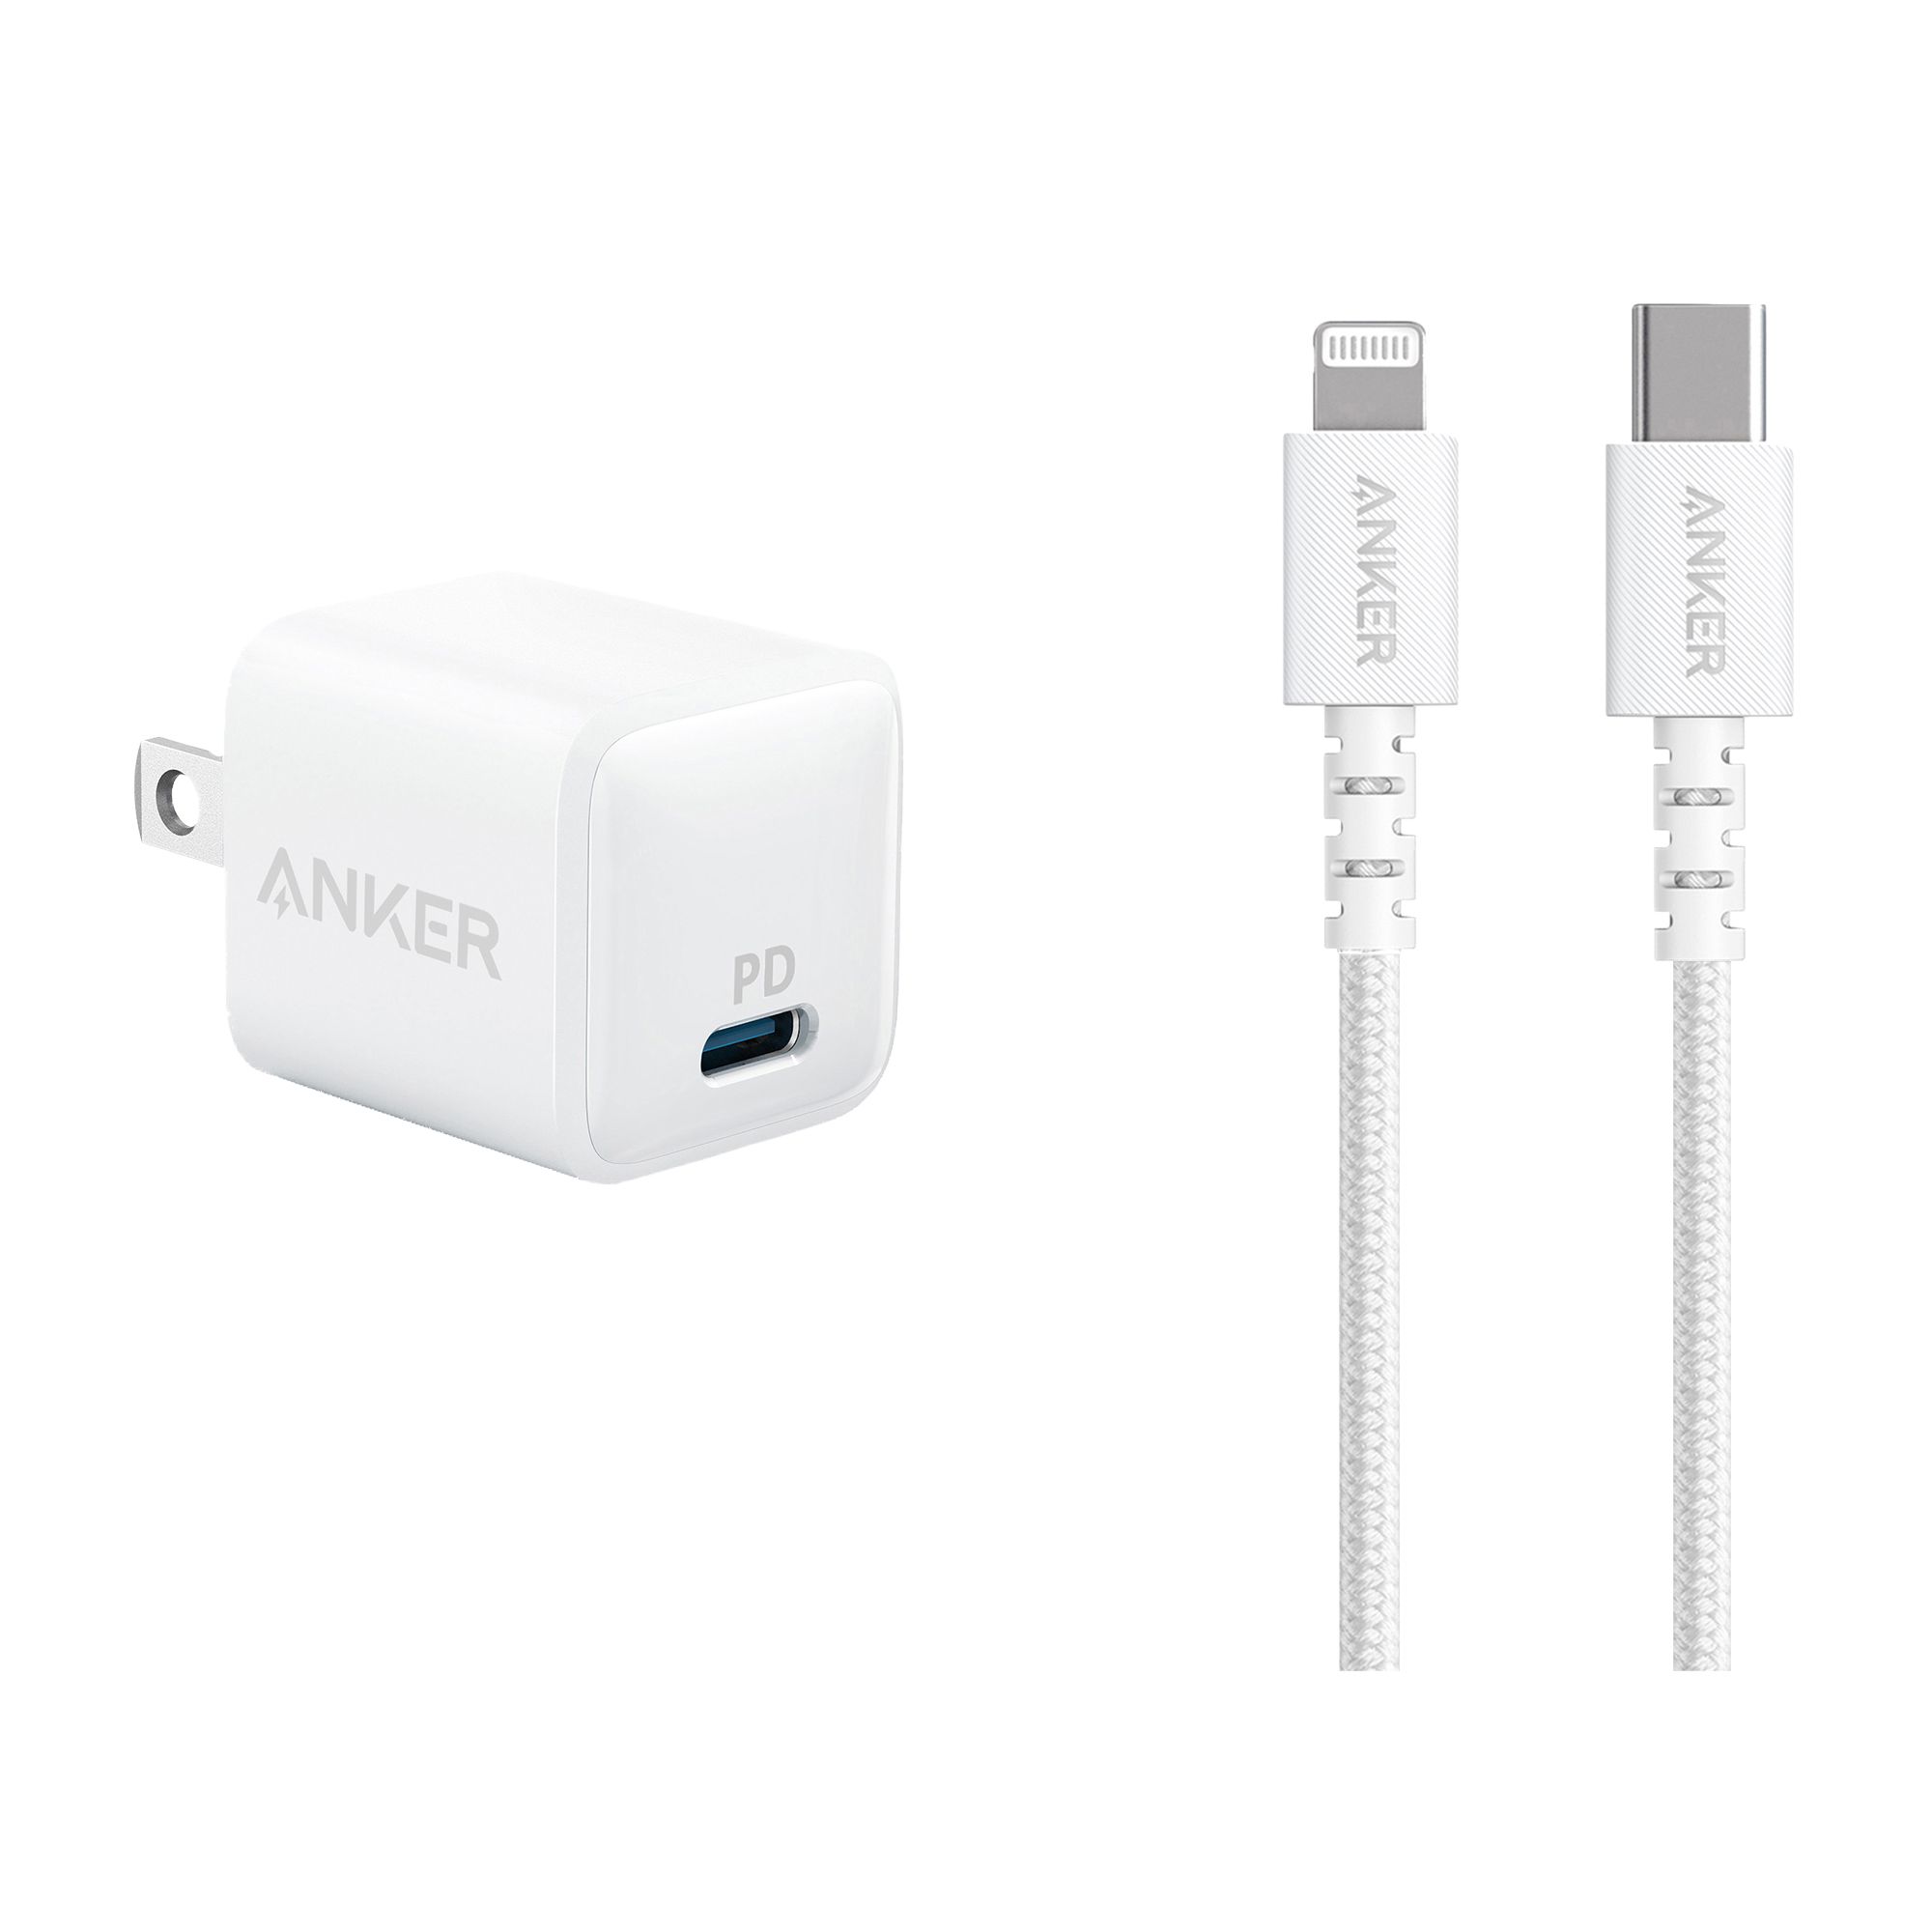 Anker USB Charger, Anker PowerPort Mini Dual Port Phone Charger